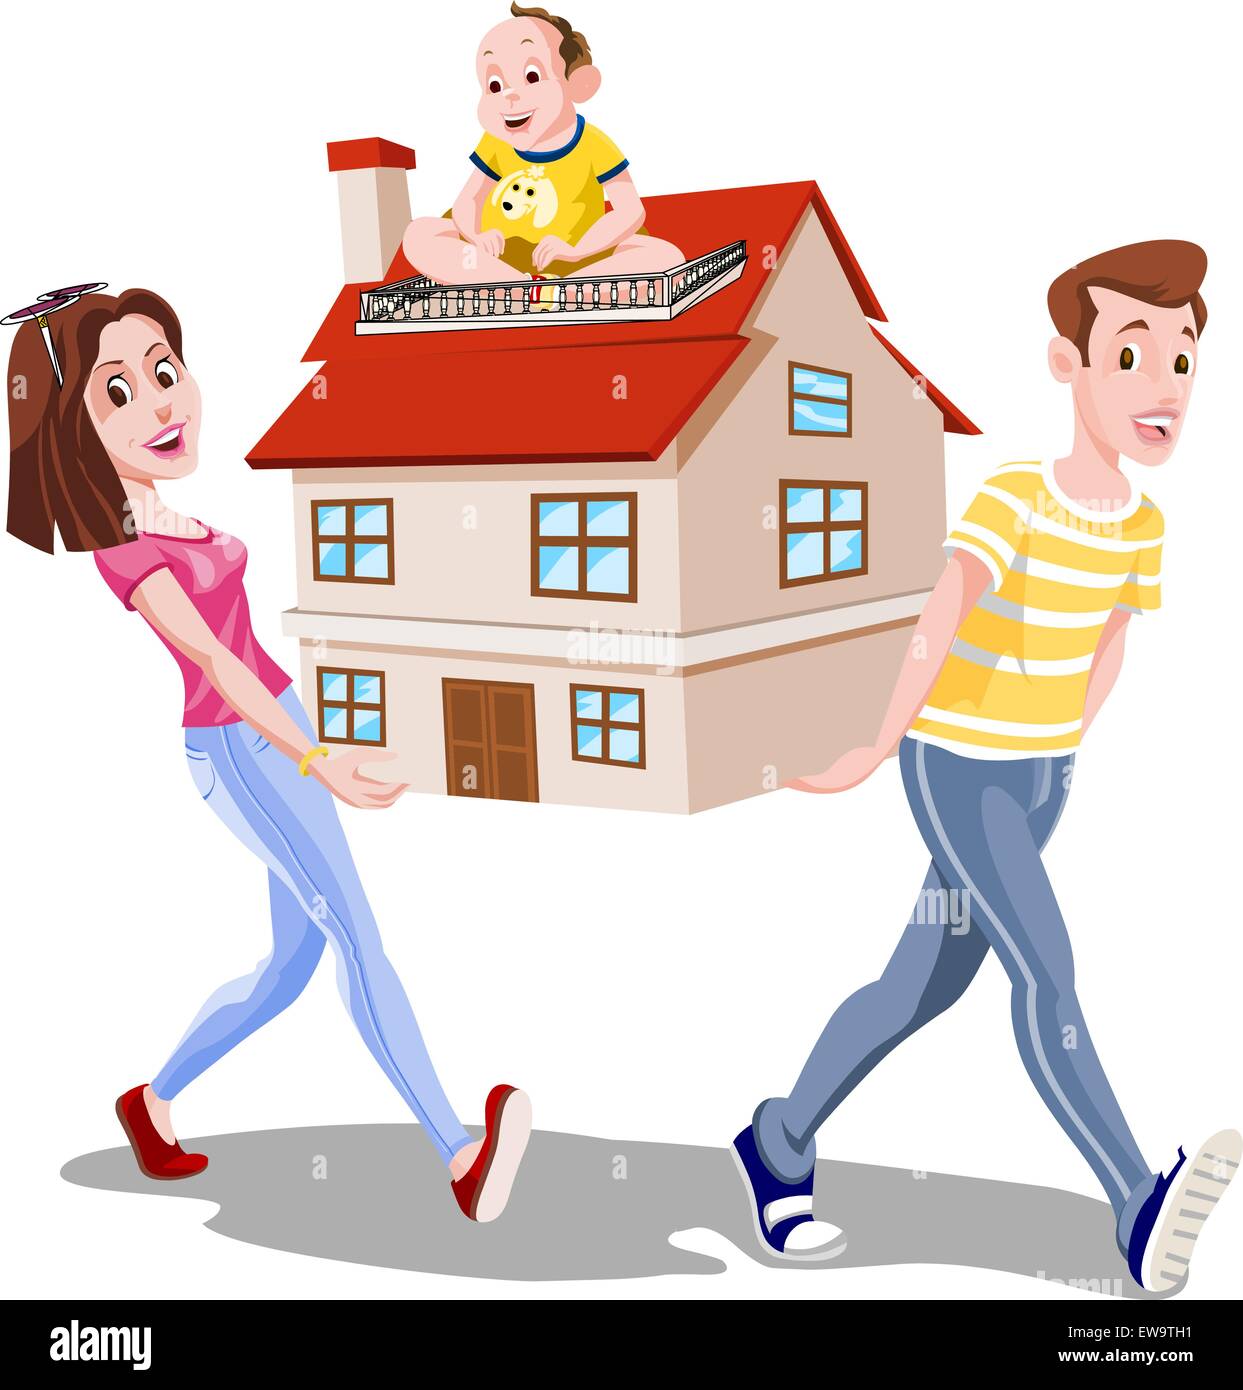 Family Carrying a House, Mom, Dad, Baby, vector illustration Stock Vector